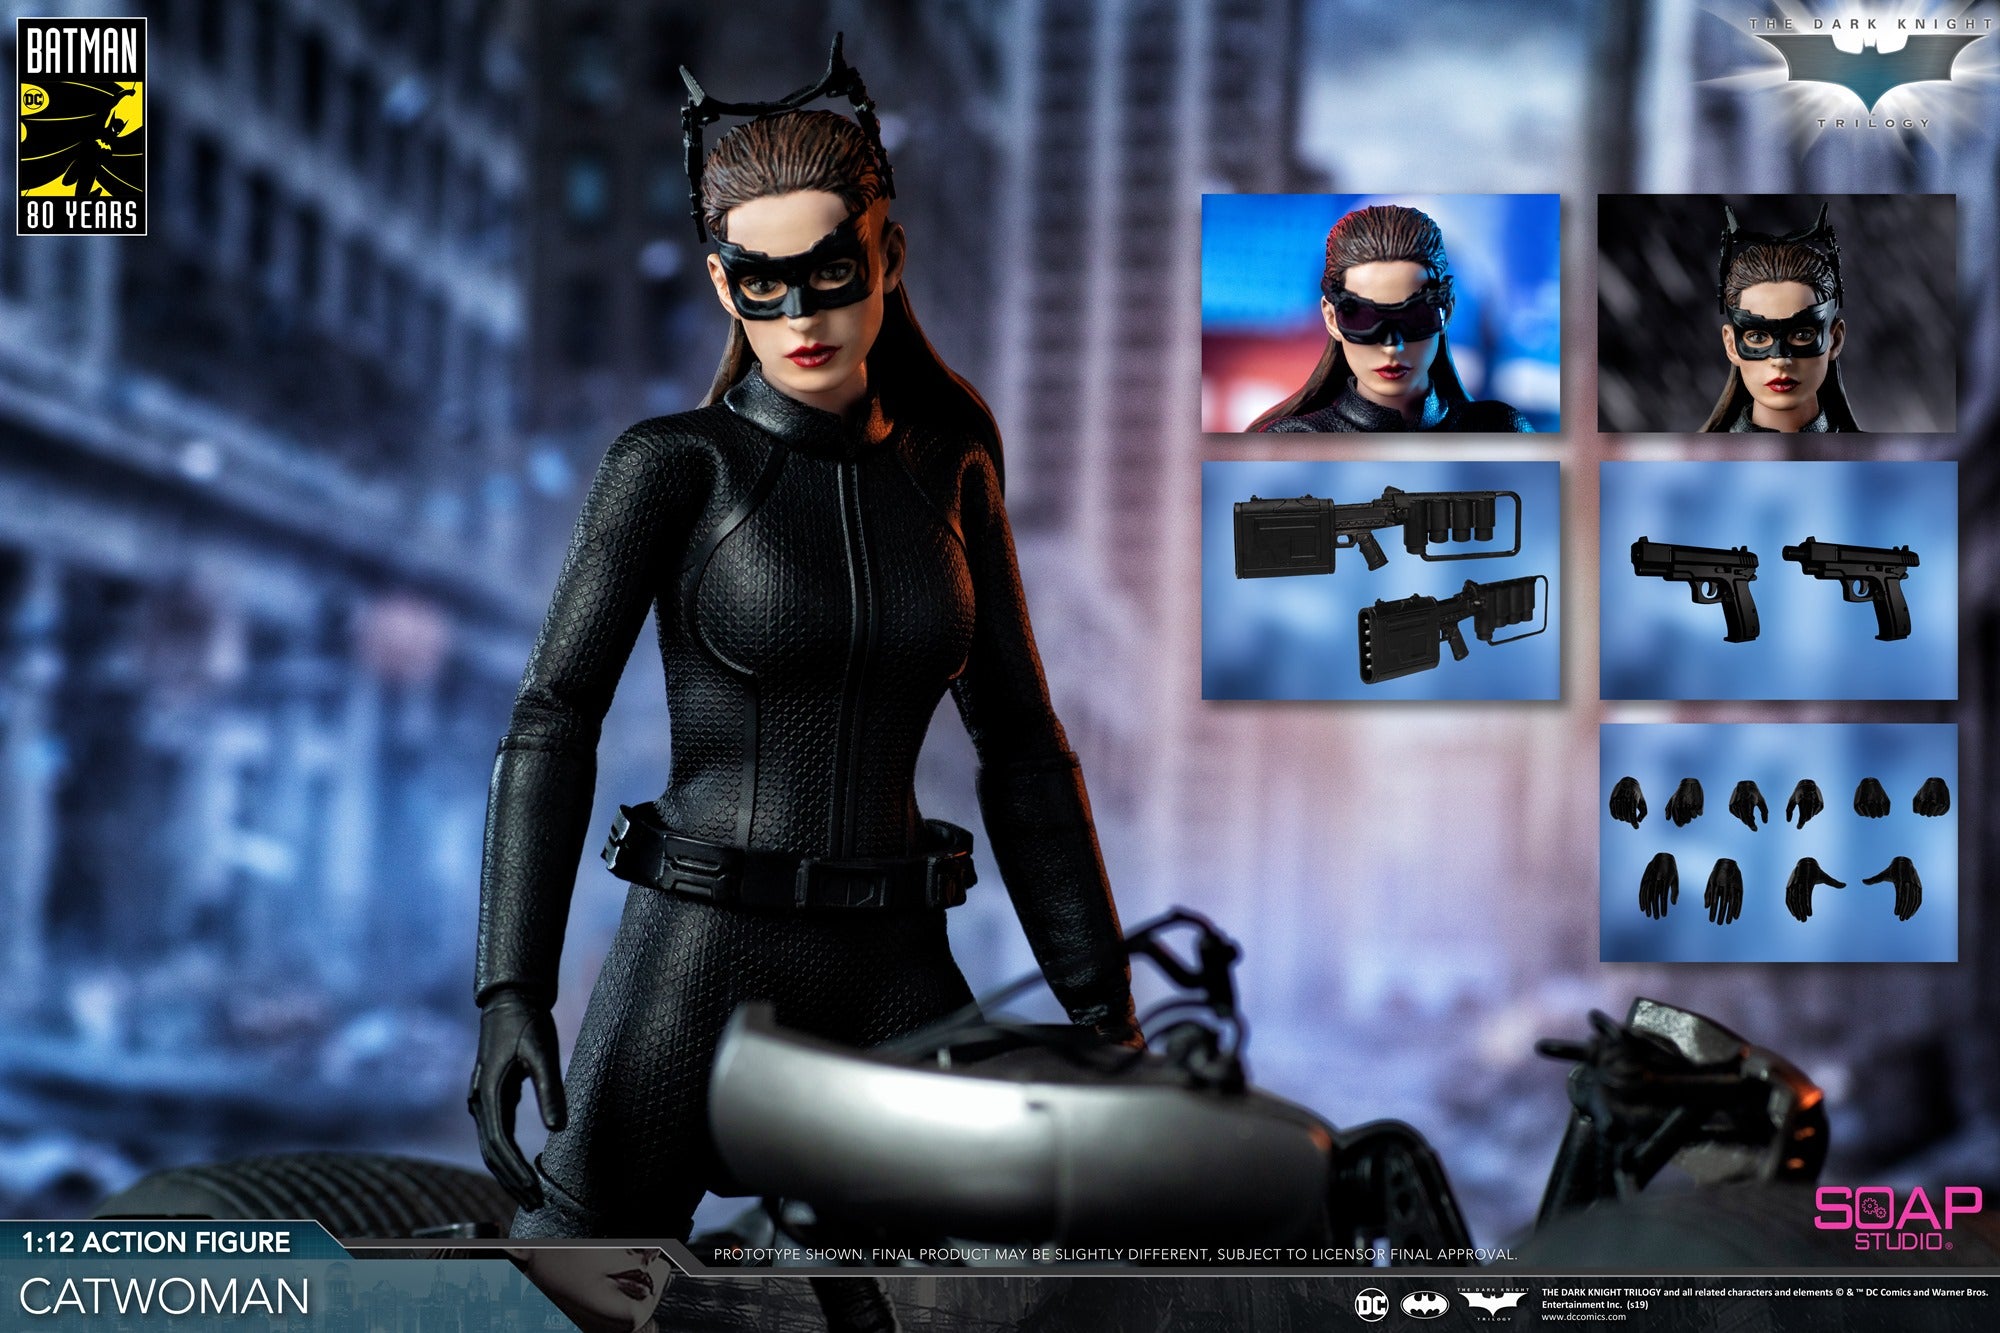 Soap Studio - The Dark Knight Rises - Catwoman (1/12 Scale) - Marvelous Toys